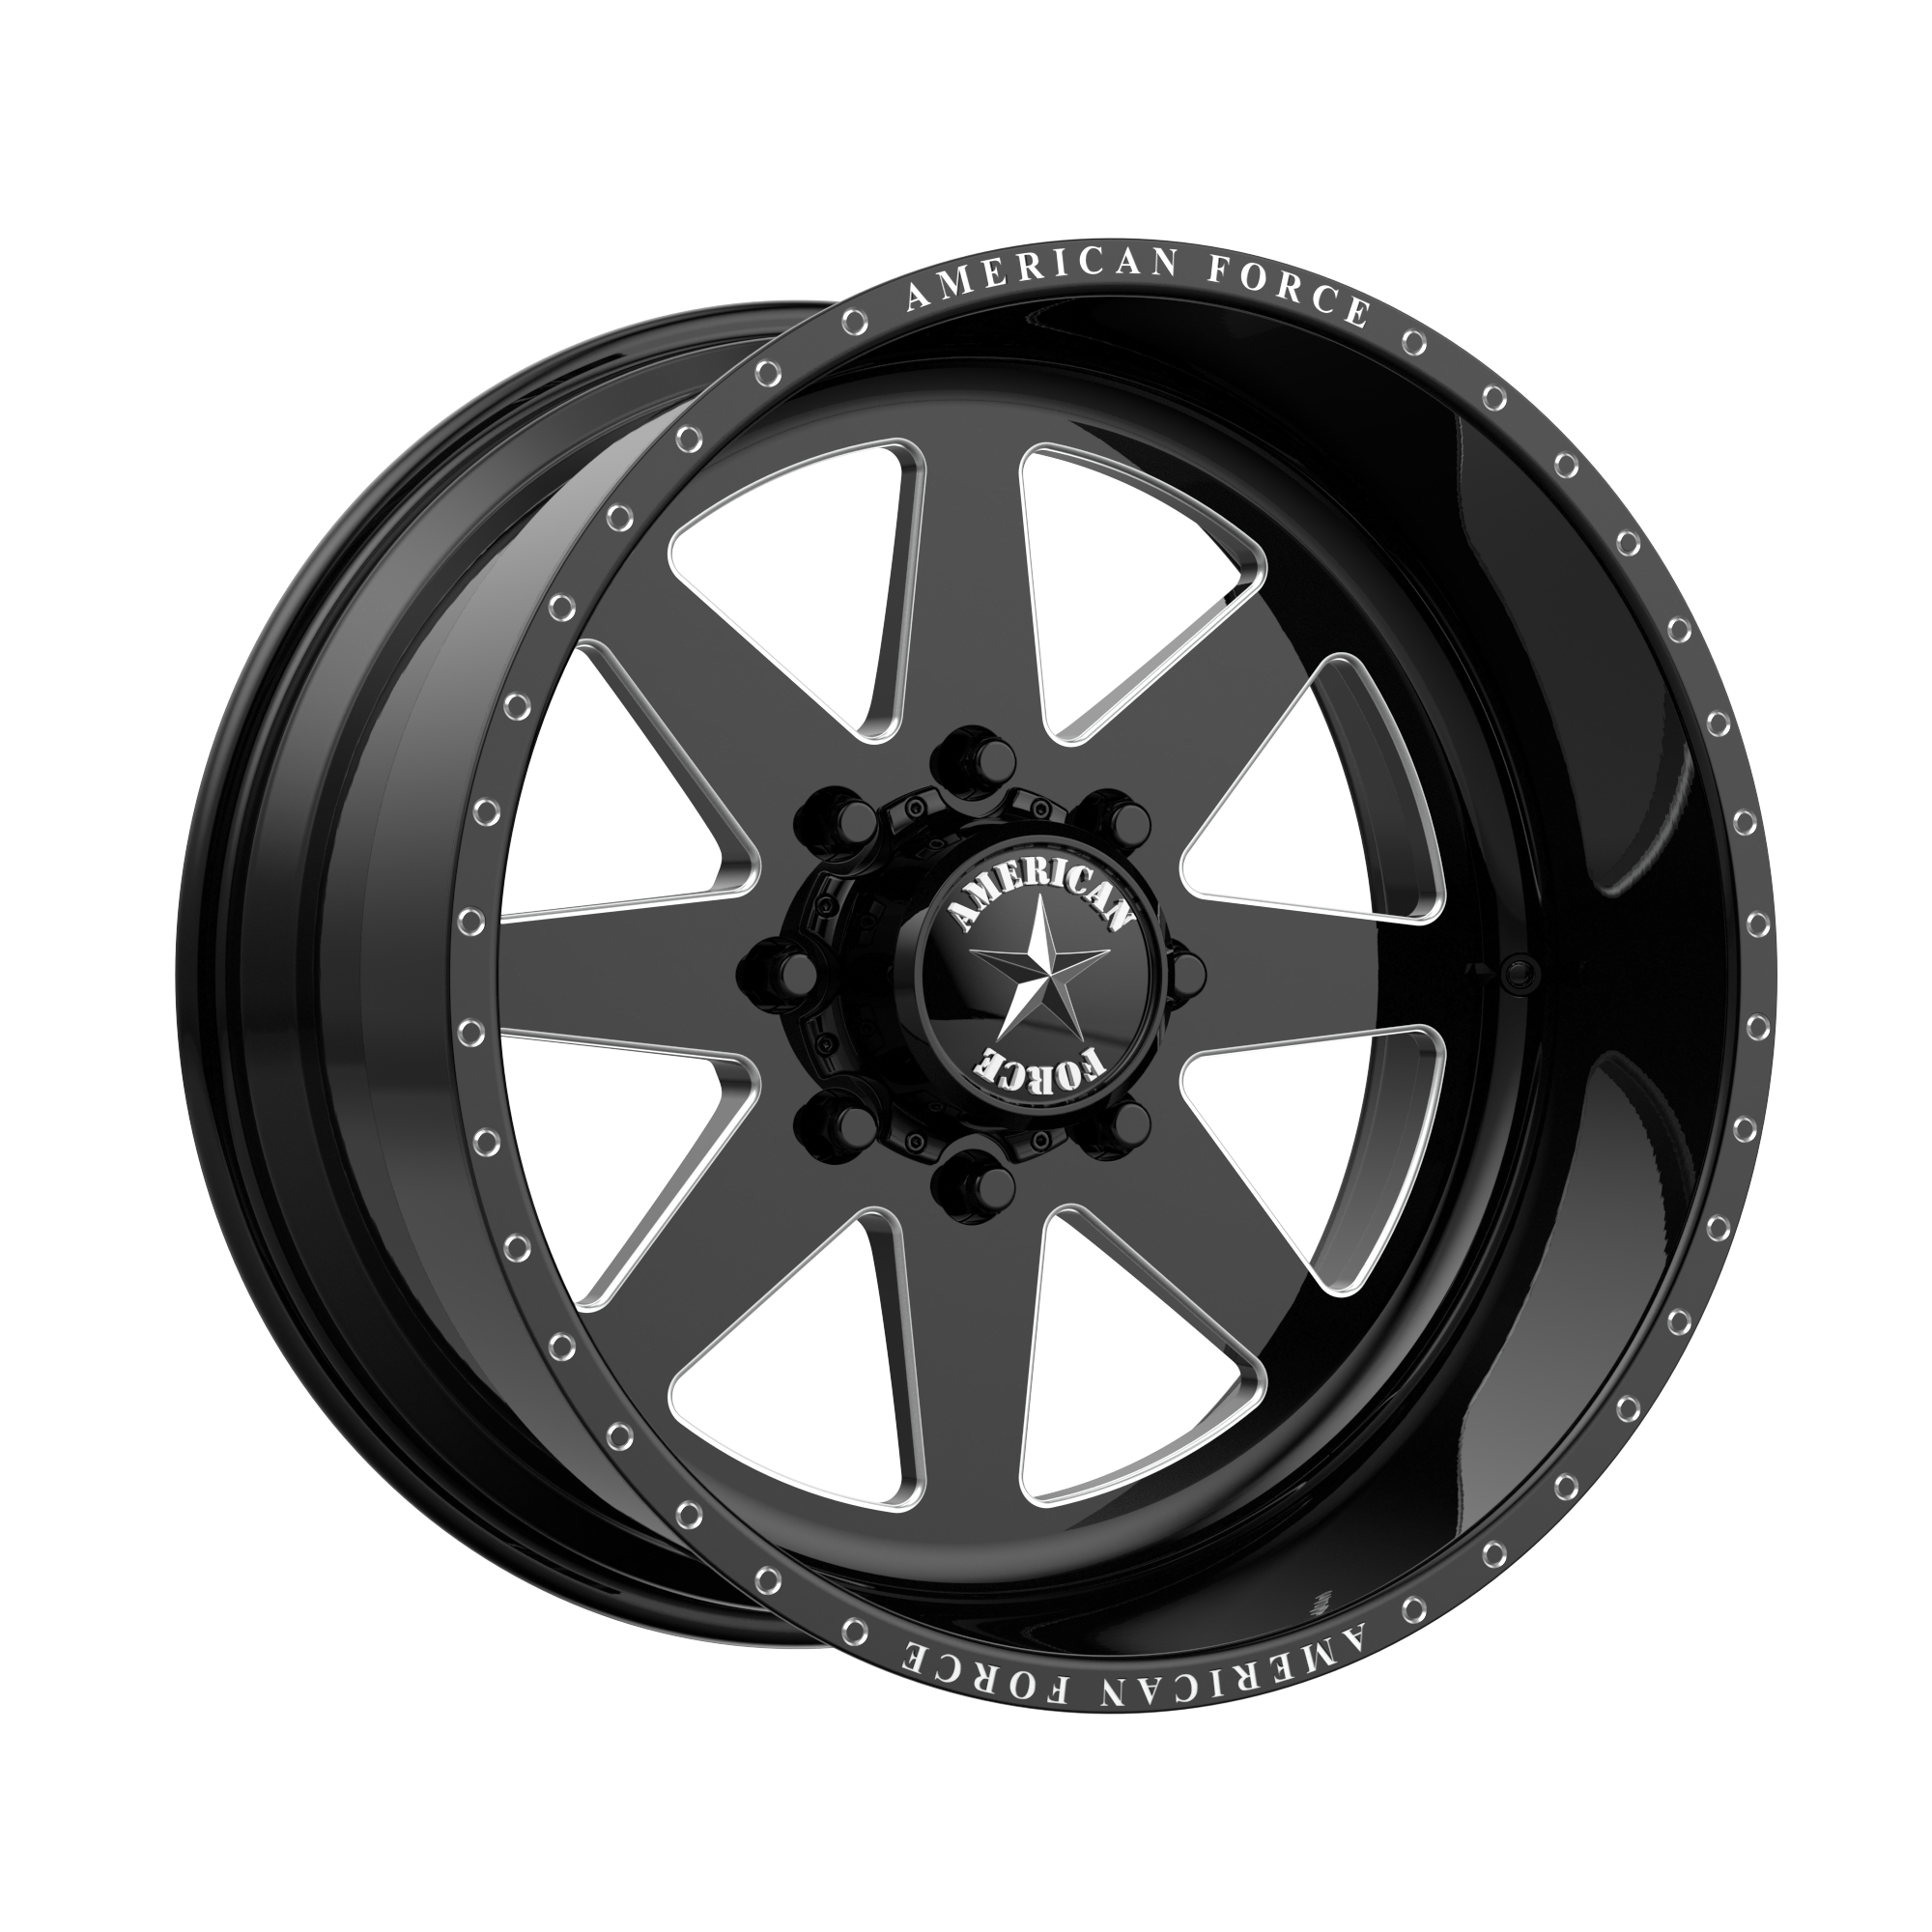 INDEPENDENCE SS 26x14 8x180.00 GLOSS BLACK MACHINED (-73 mm) - Tires and Engine Performance